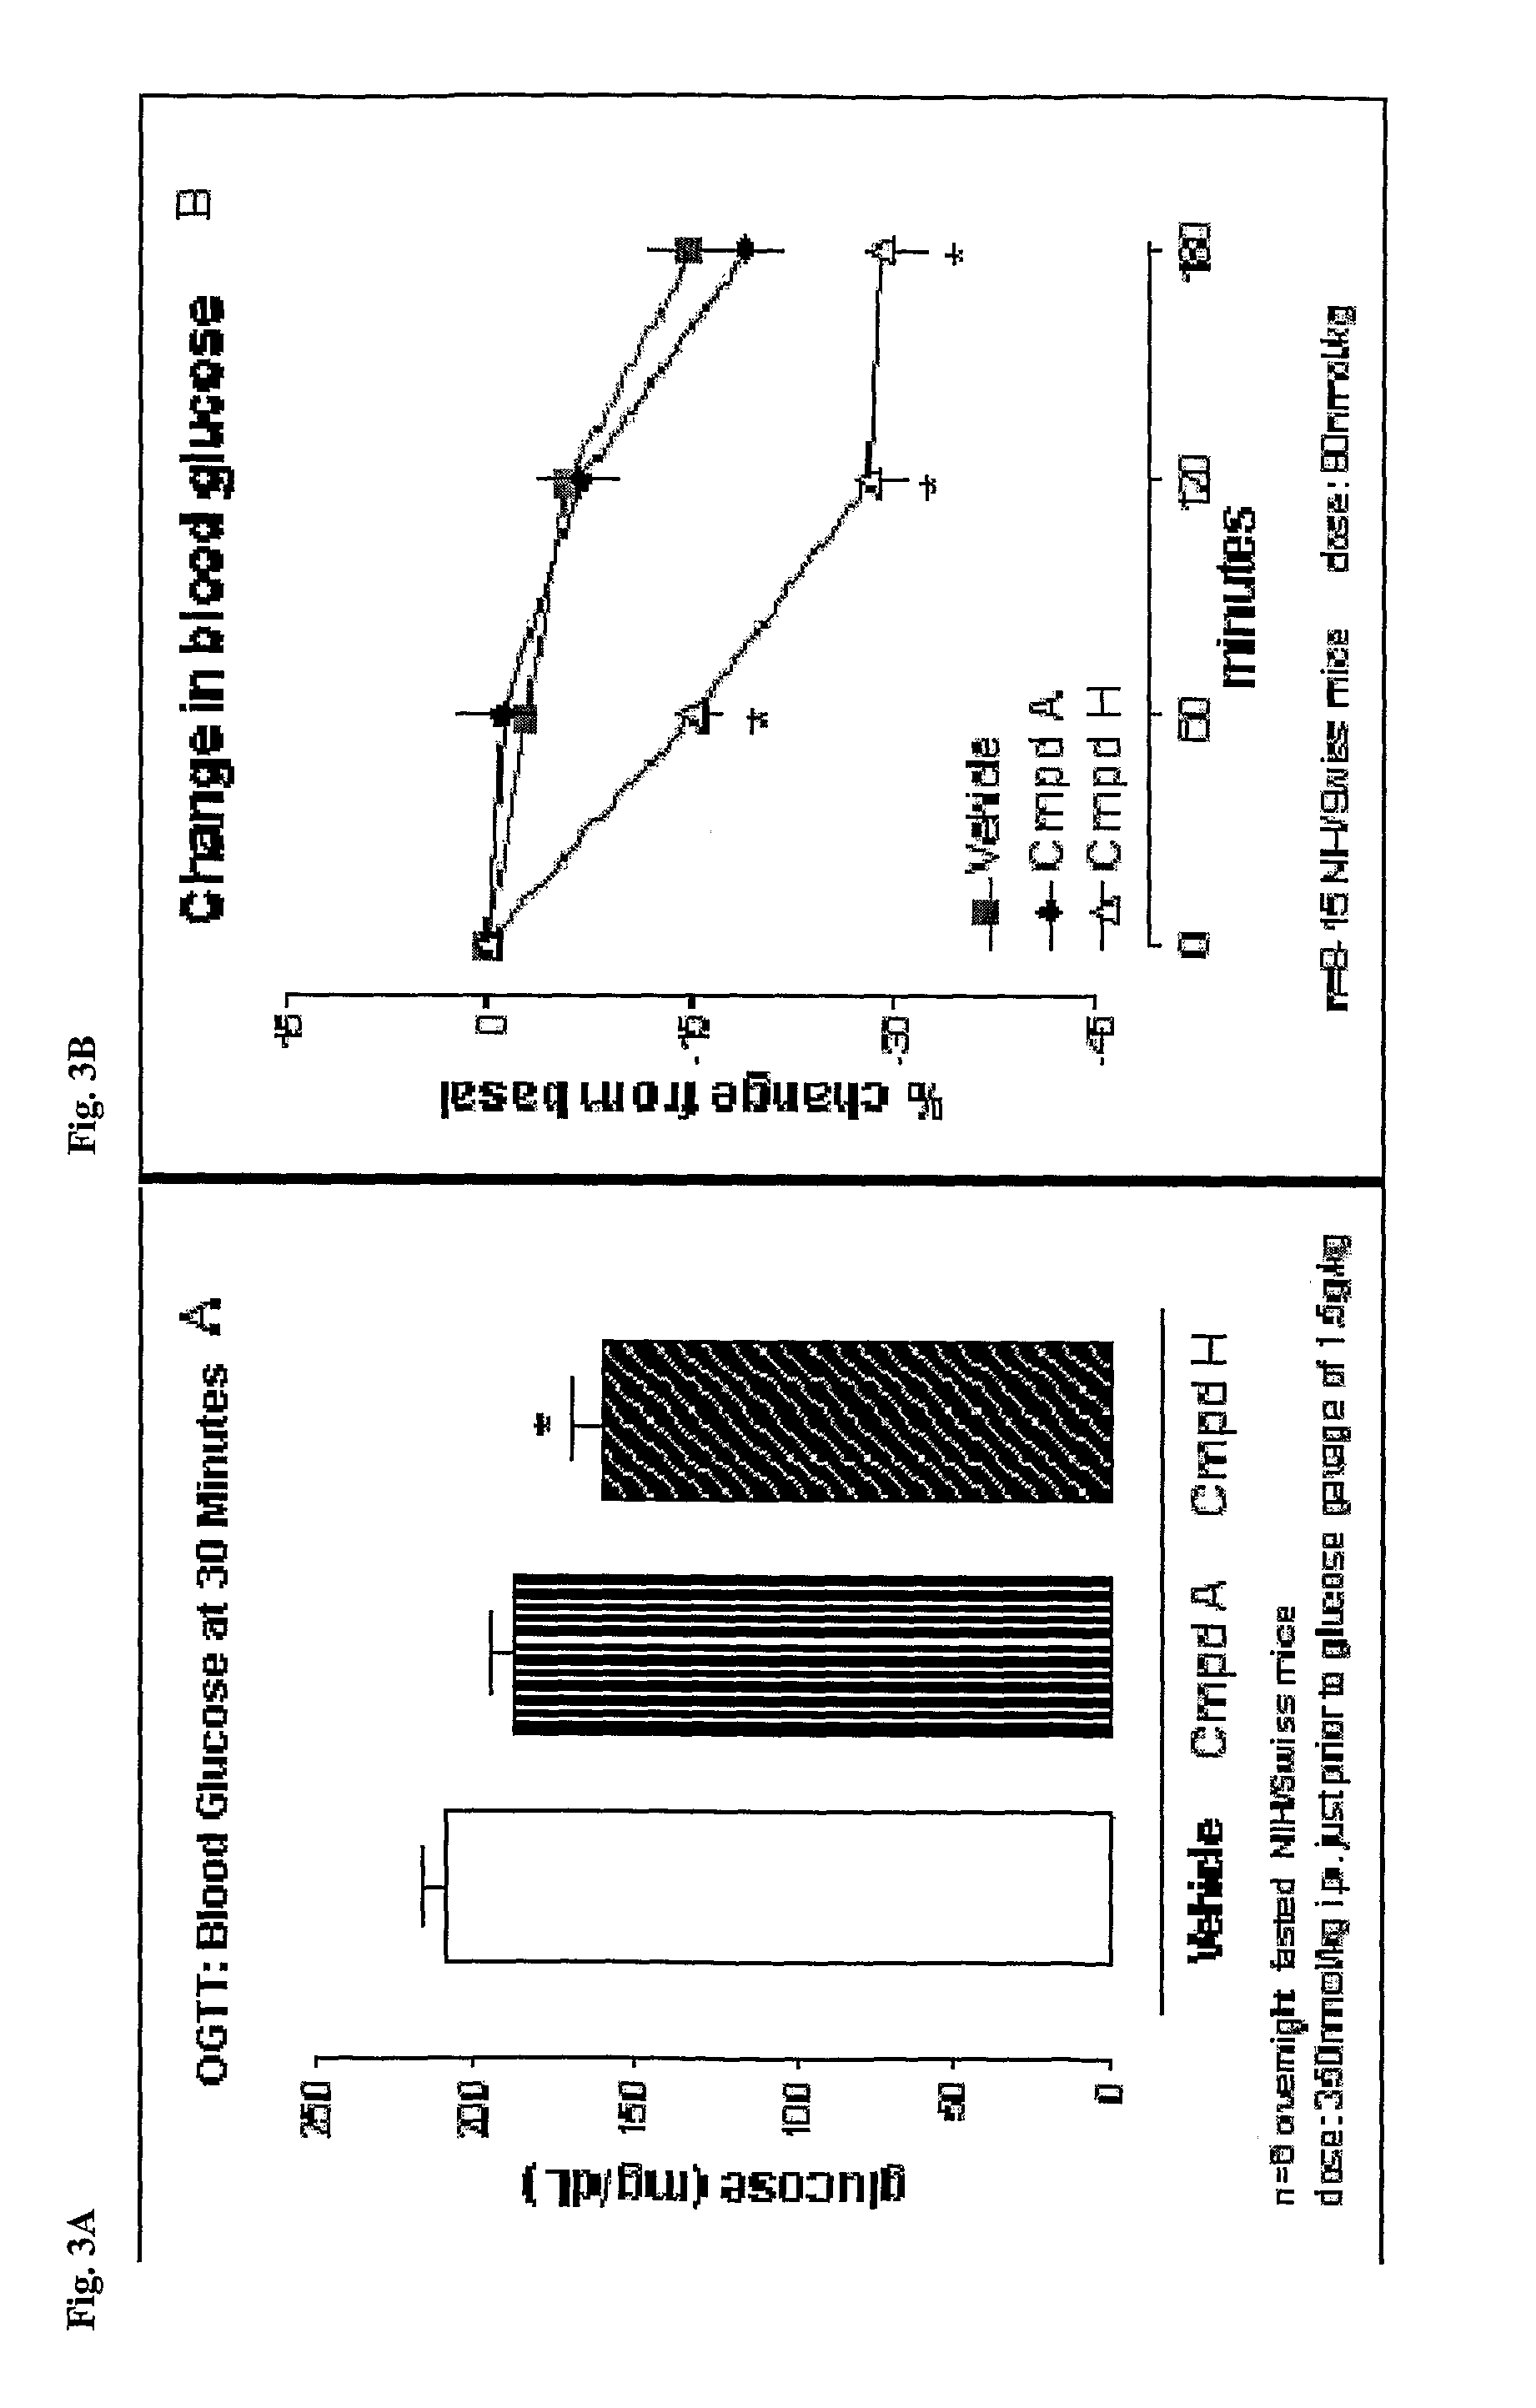 GIP analog and hybrid polypeptides with selectable properties